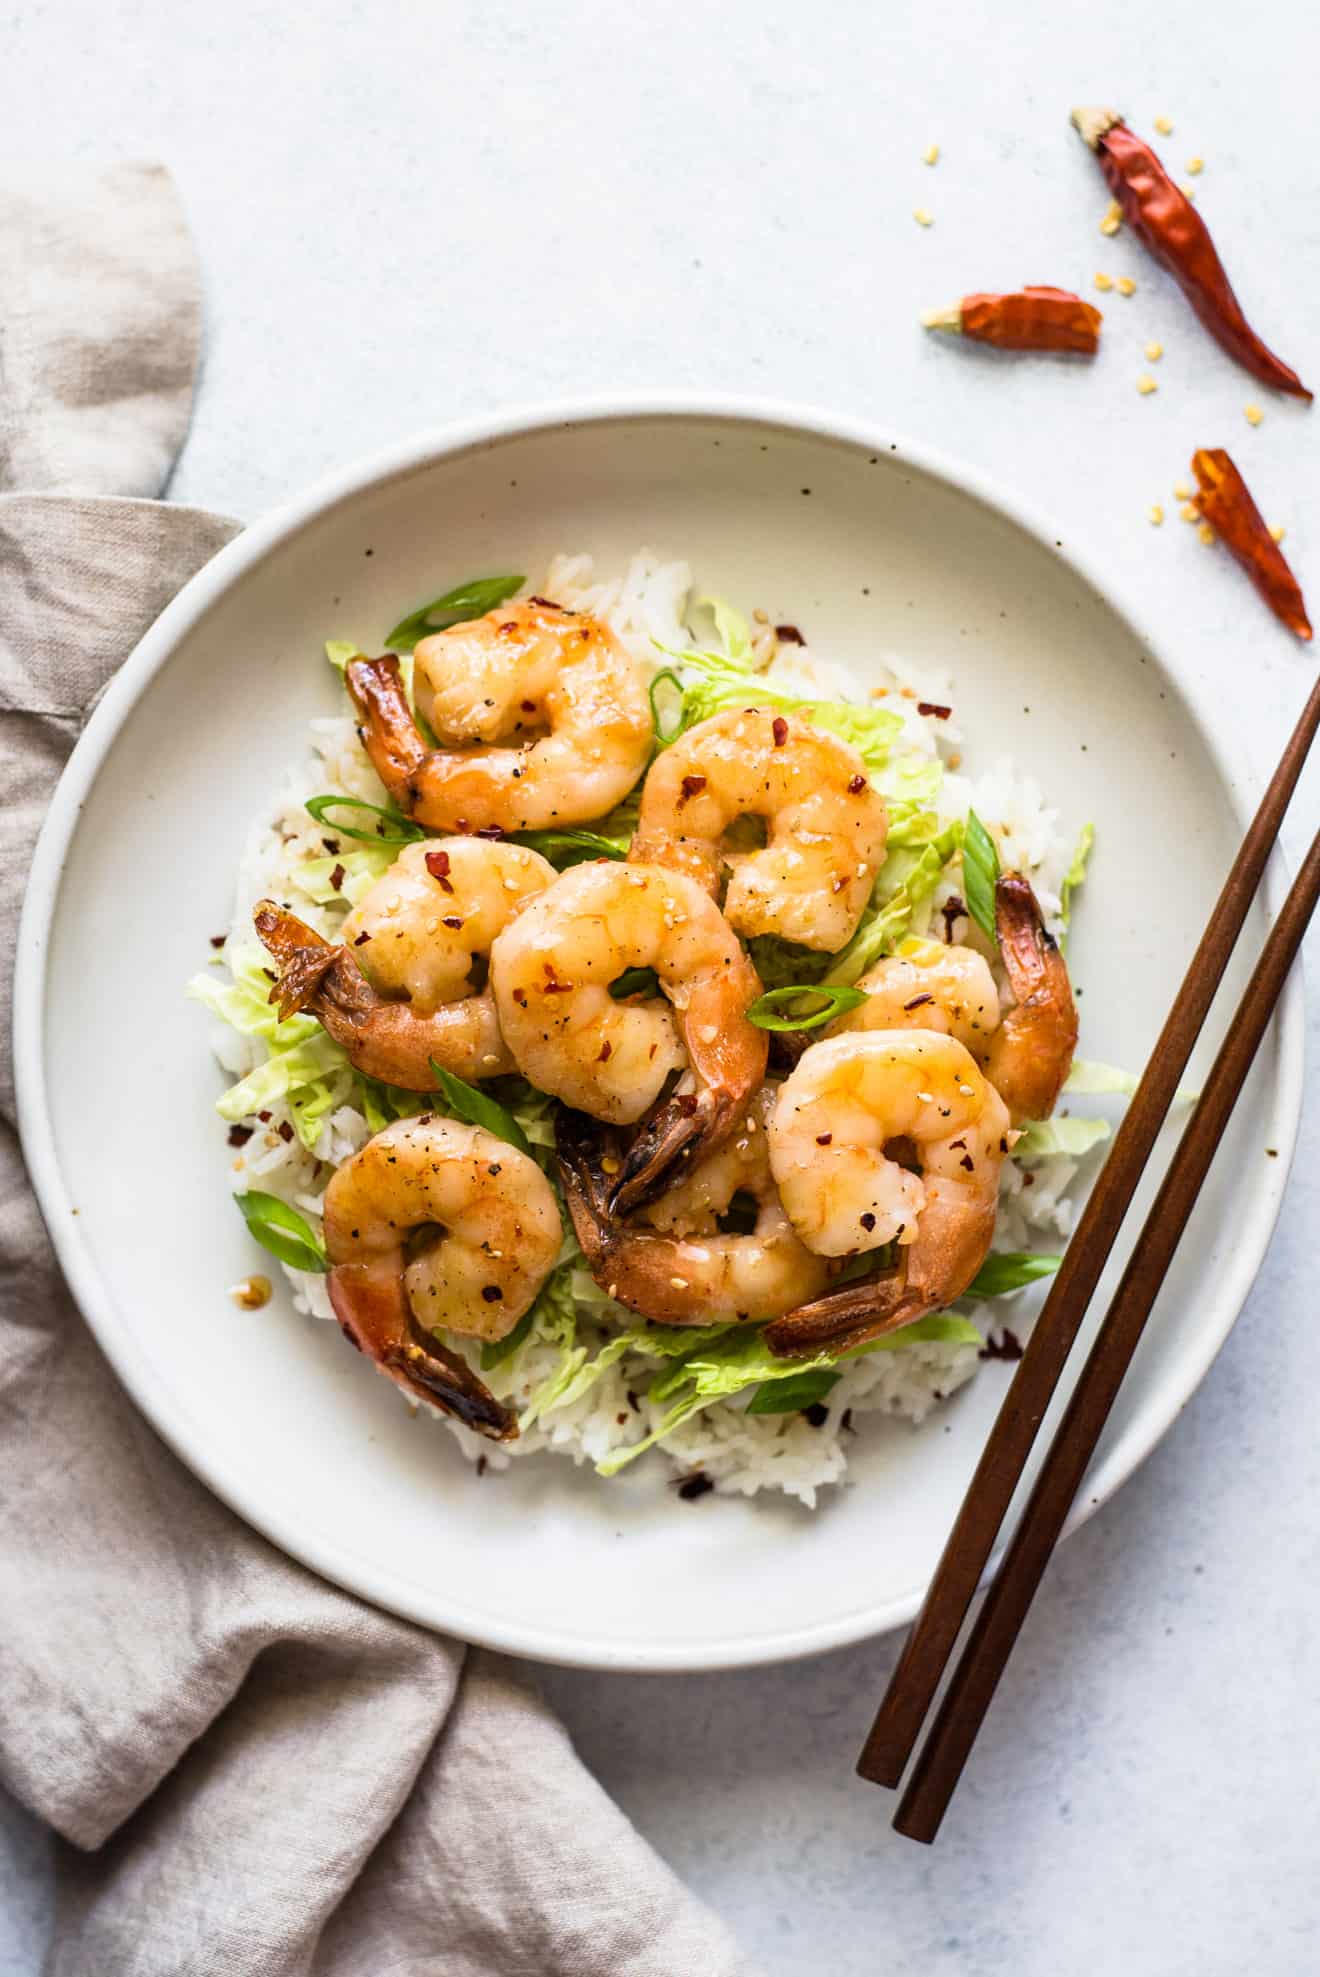 This mouth-watering Honey Chili Garlic Shrimp takes only 15 minutes to make!